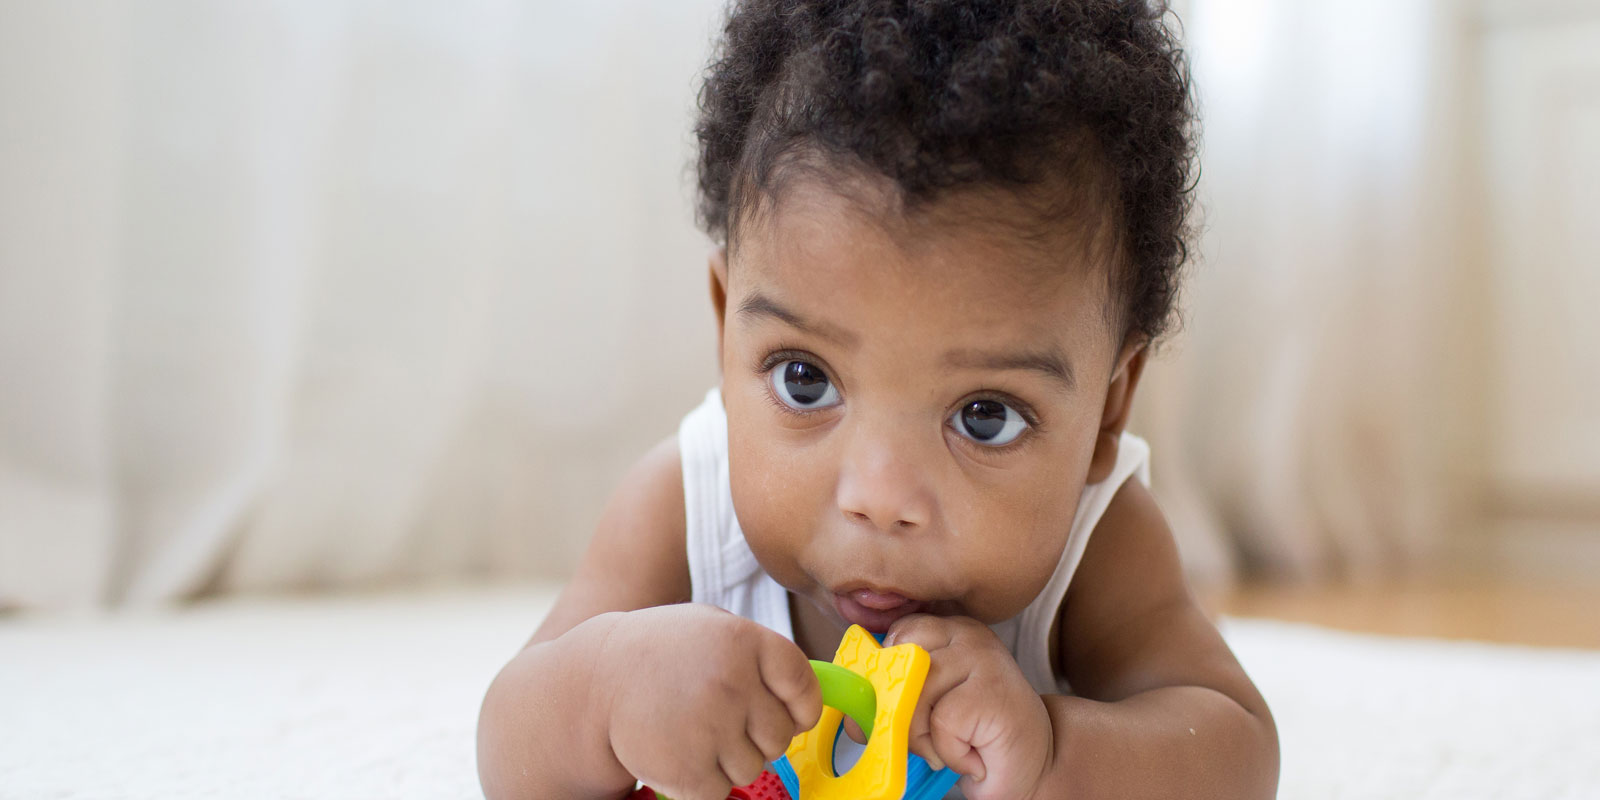 Baby Aged 8 Months Physical Development: What to Expect